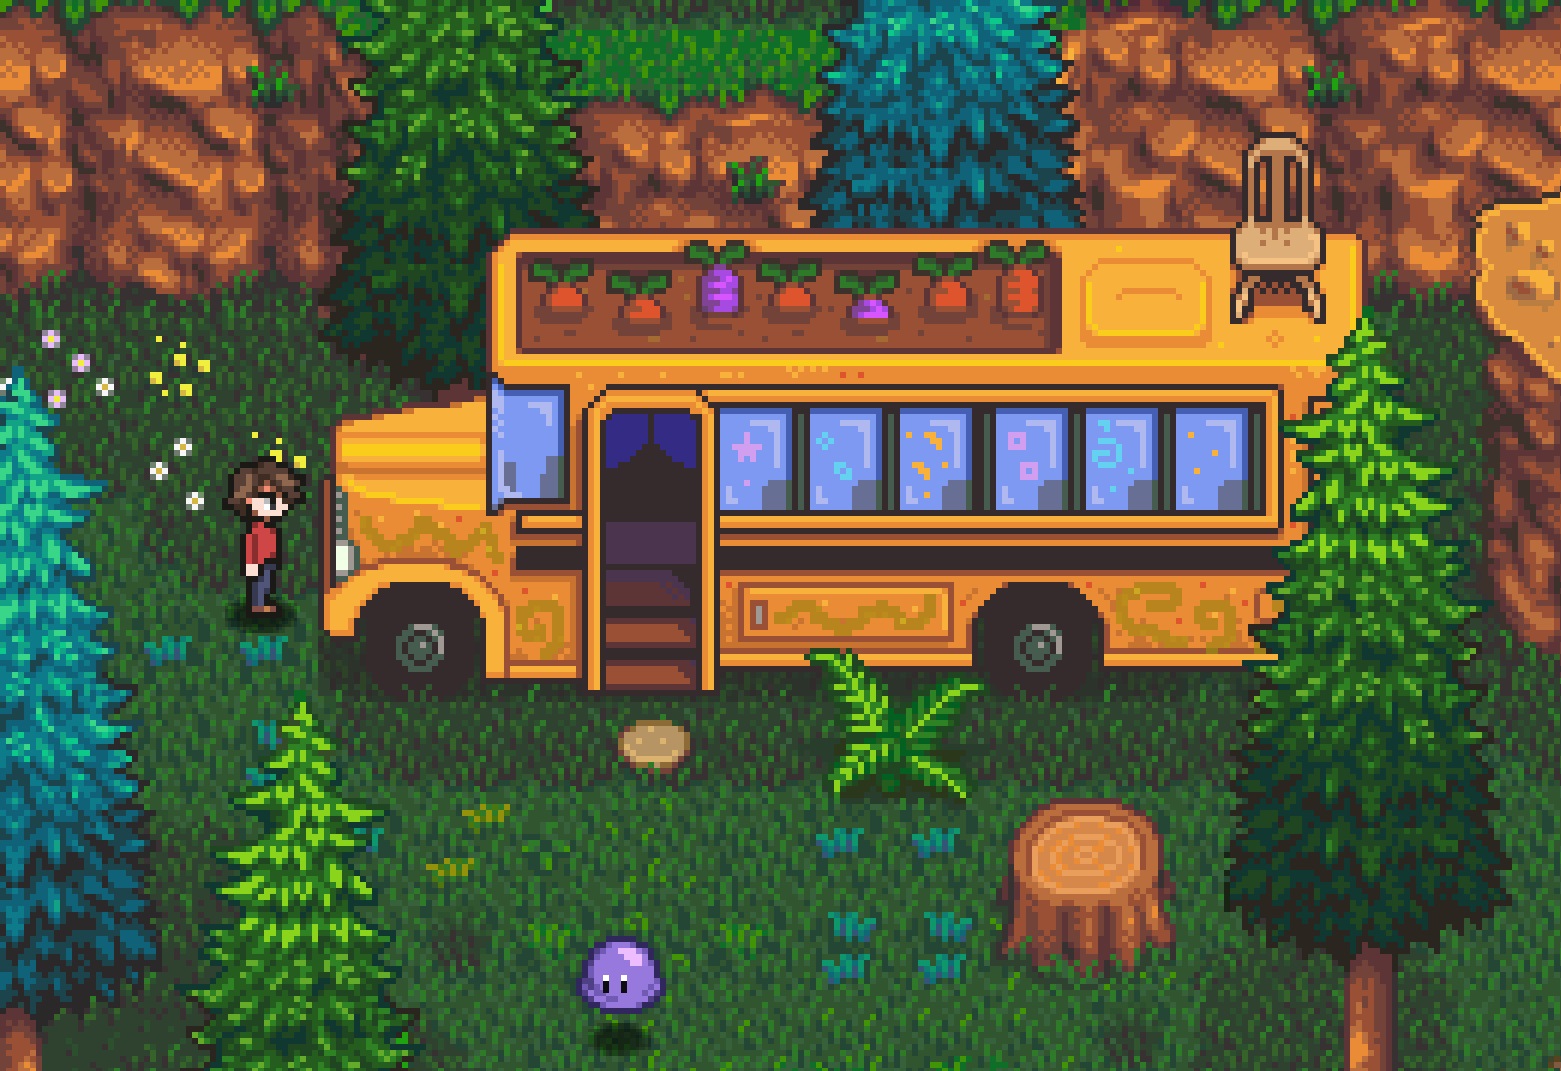 Haunted Chocolatier - A player stands in a green forest near an old bus with an open door and a garden plot on its roof.